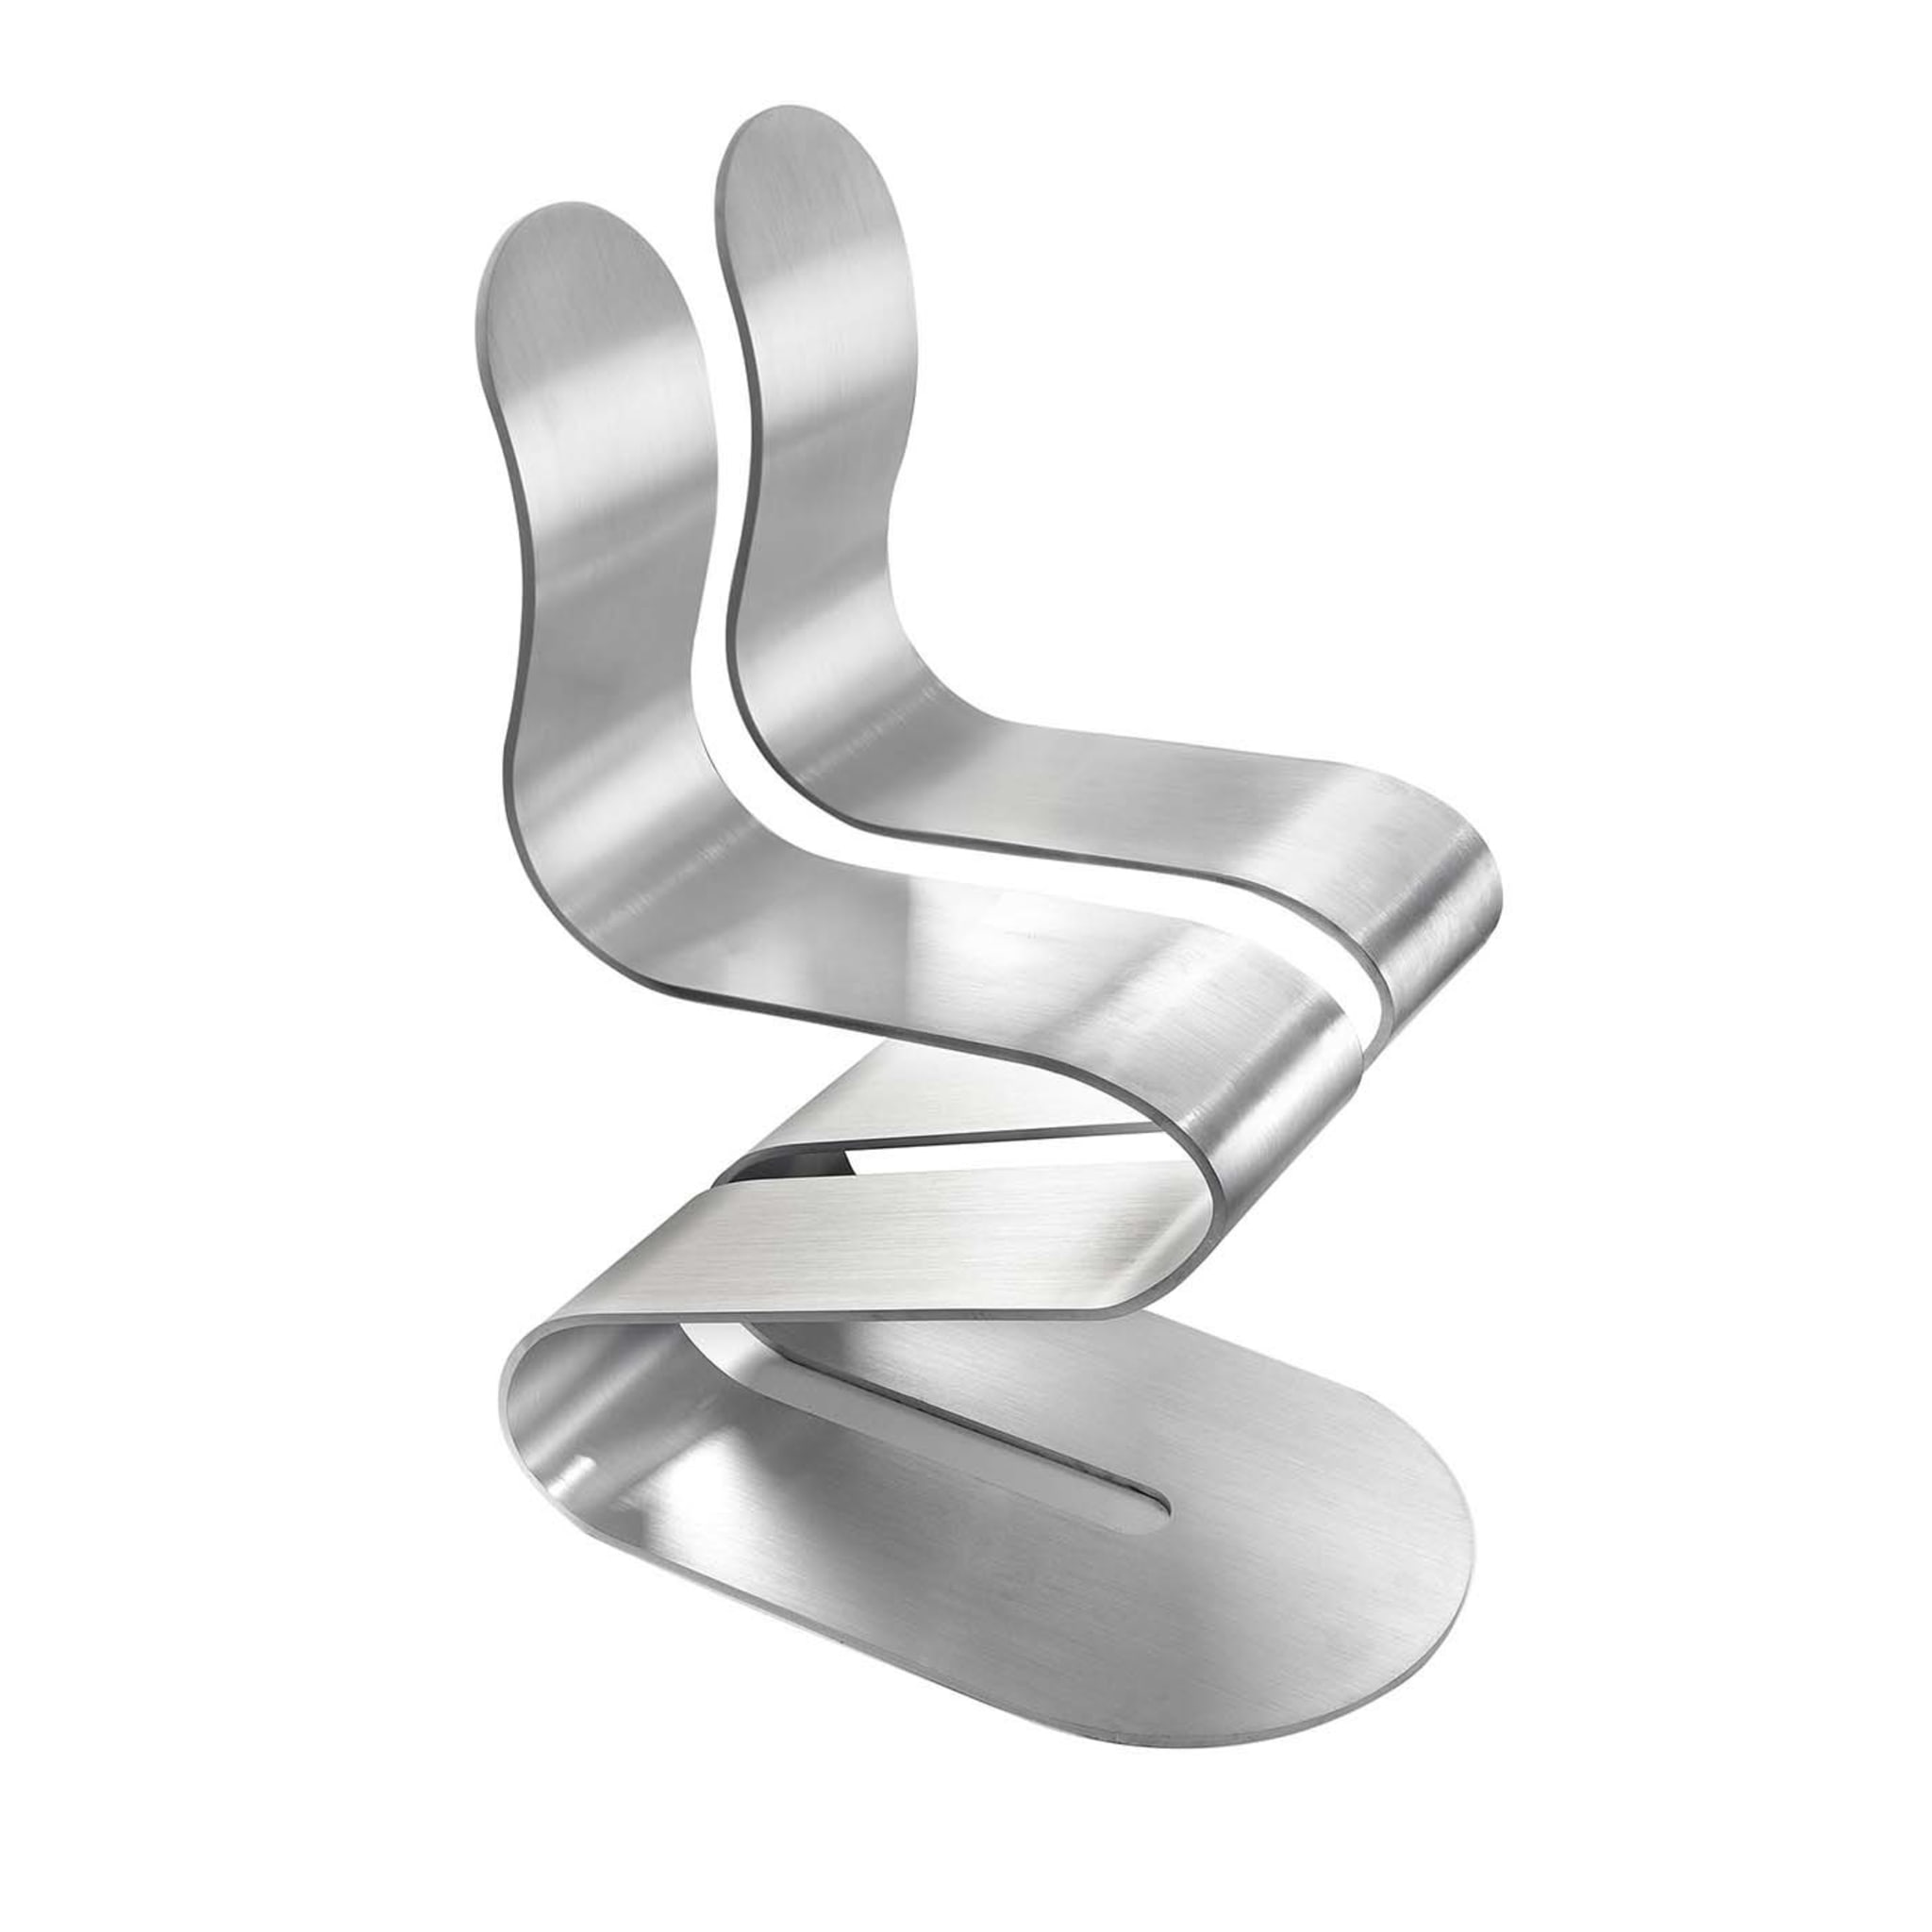 Fluid Ribbon Silver Chair by Michael D'Amato - Main view